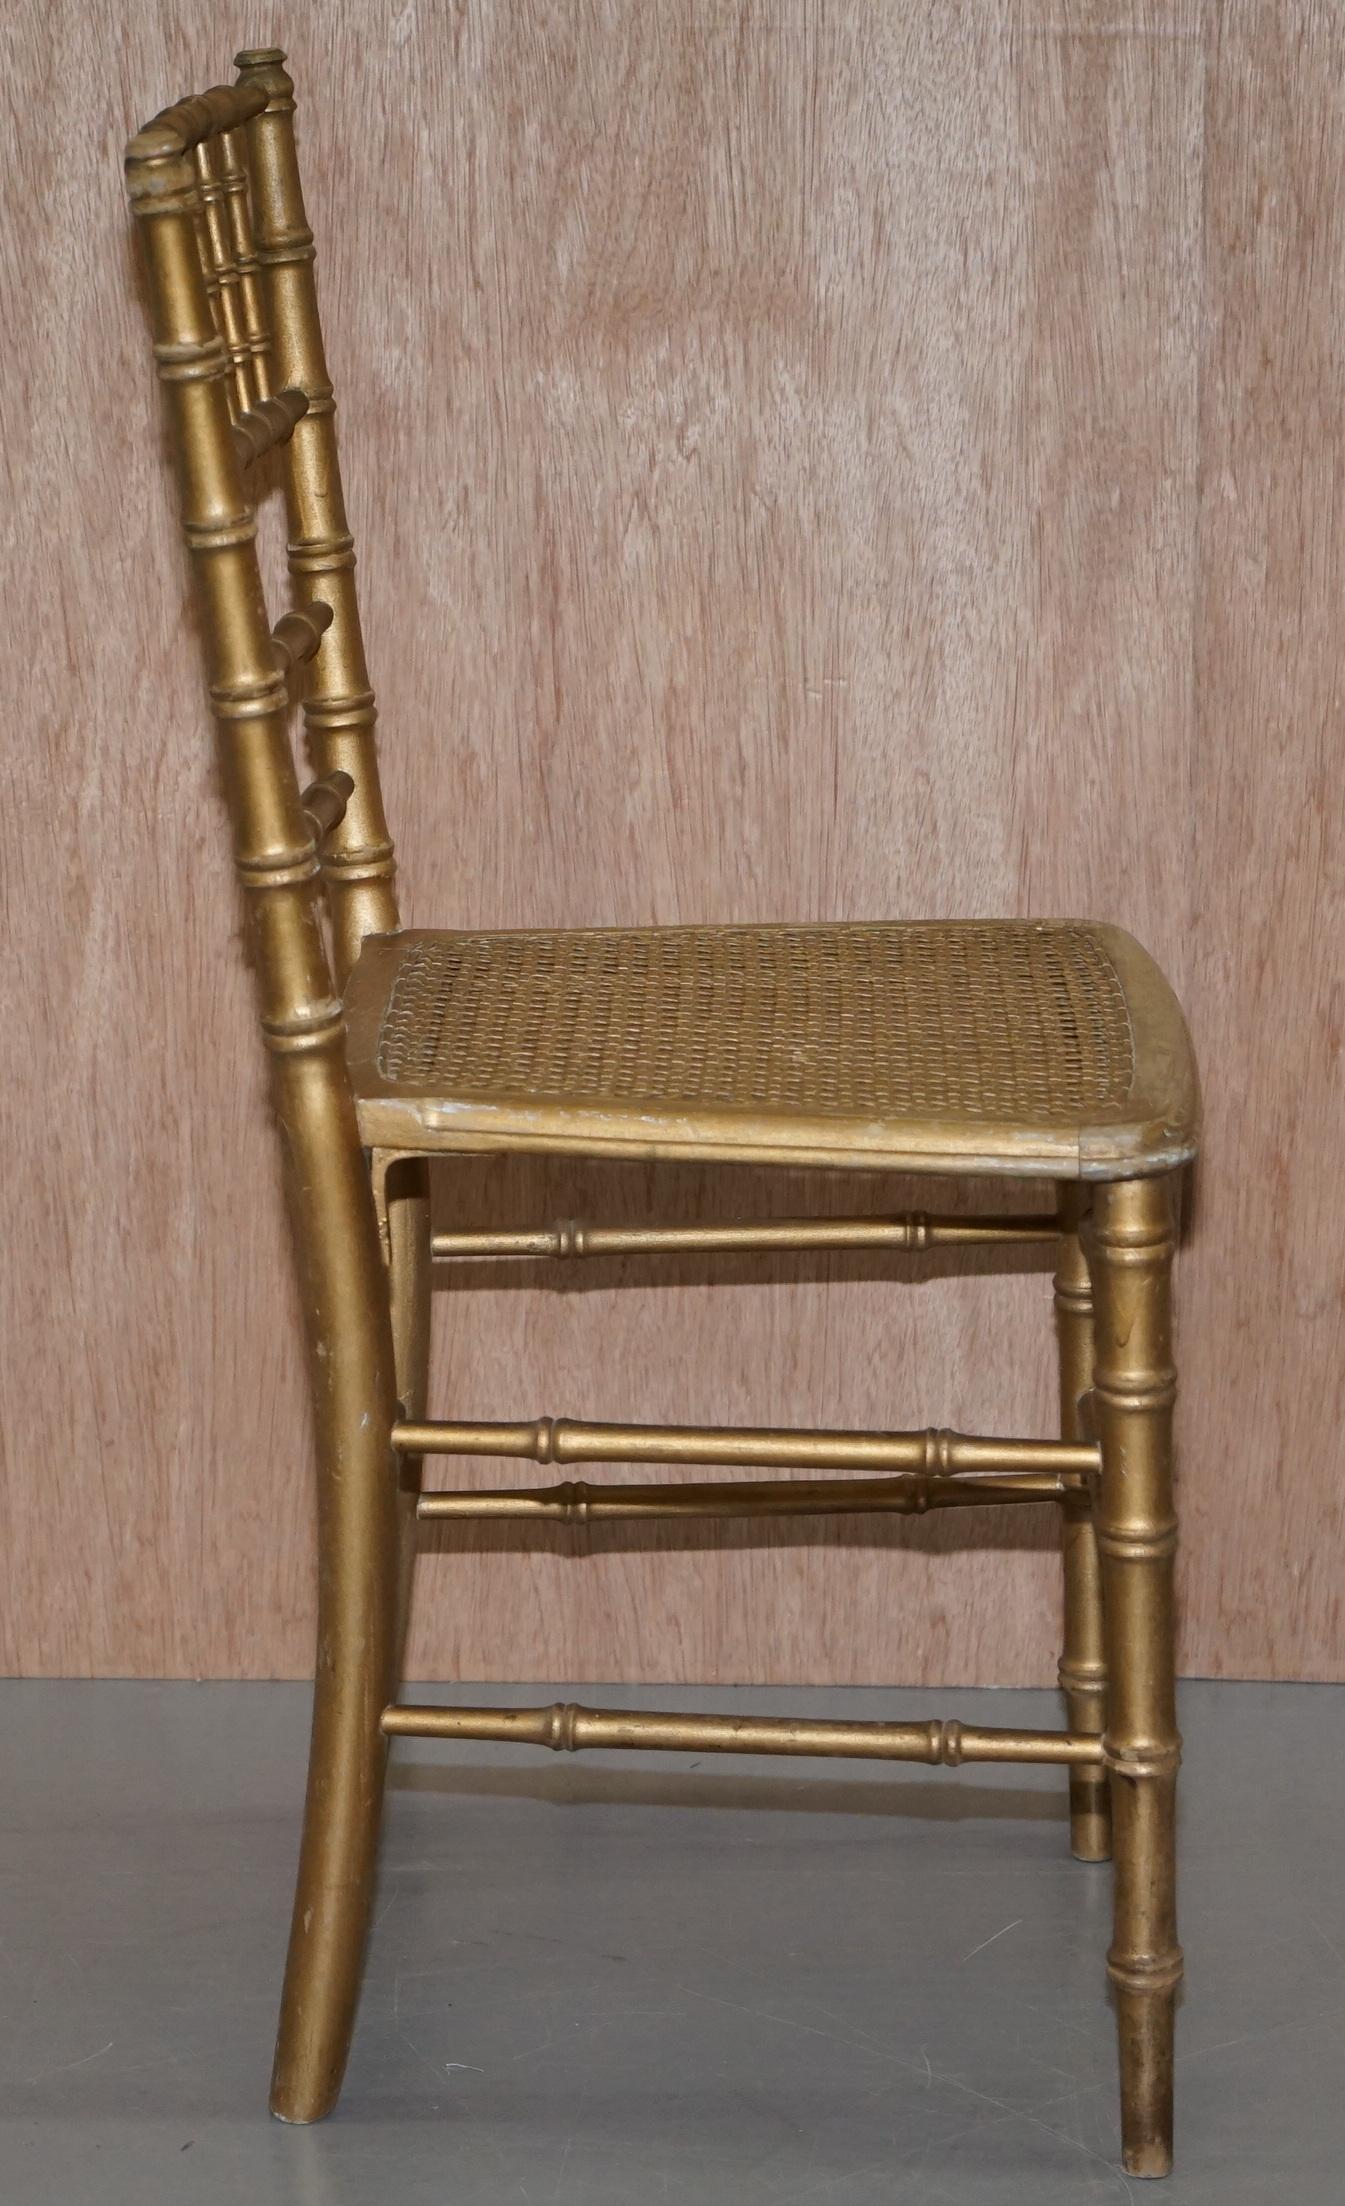 Edwardian Giltwood Famboo Regency Style Berger Chair with Newly Gold Giilt Frame For Sale 1